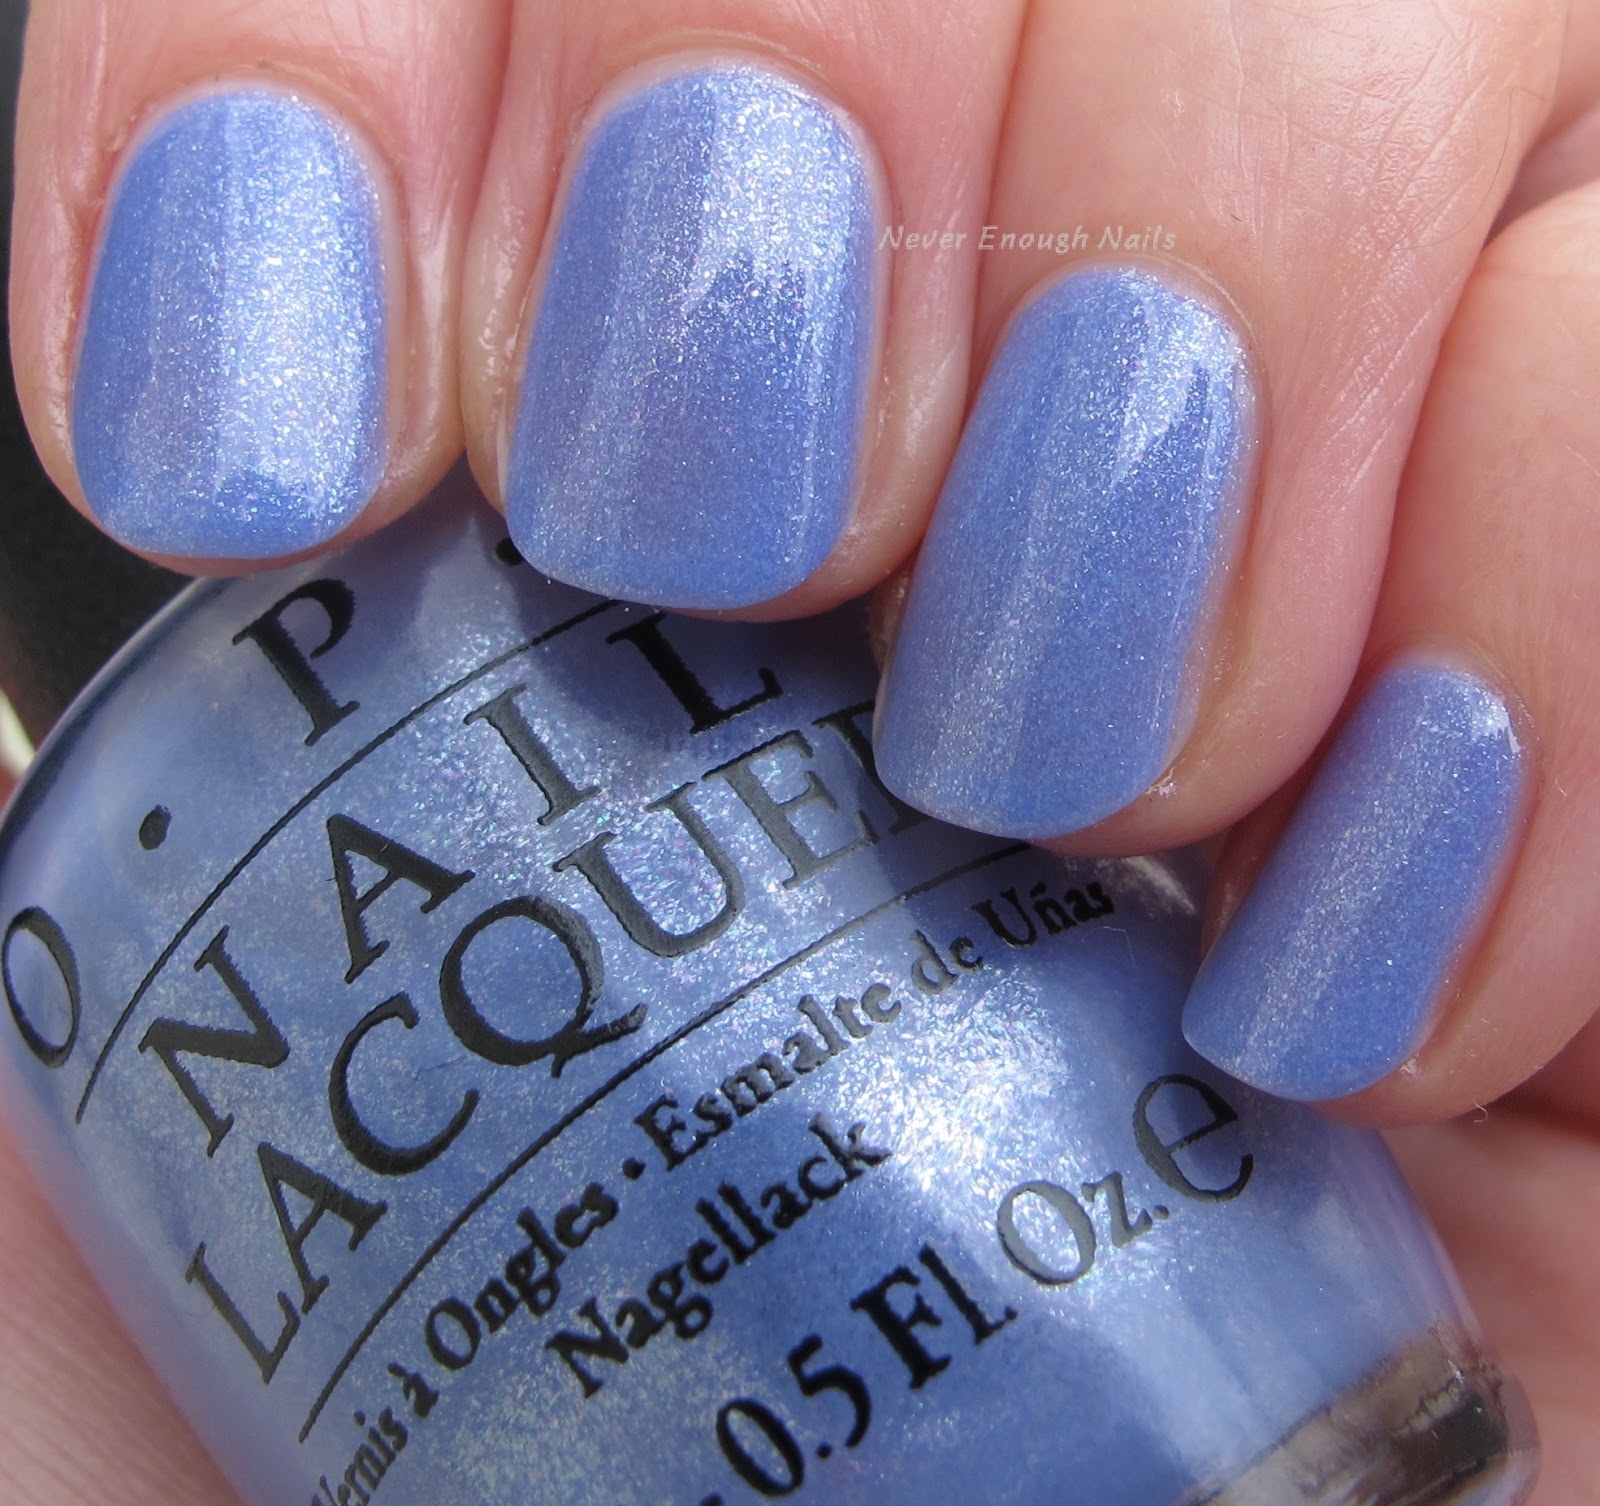 Never Enough Nails: OPI New Orleans Collection Swatches and Review, Part 2!